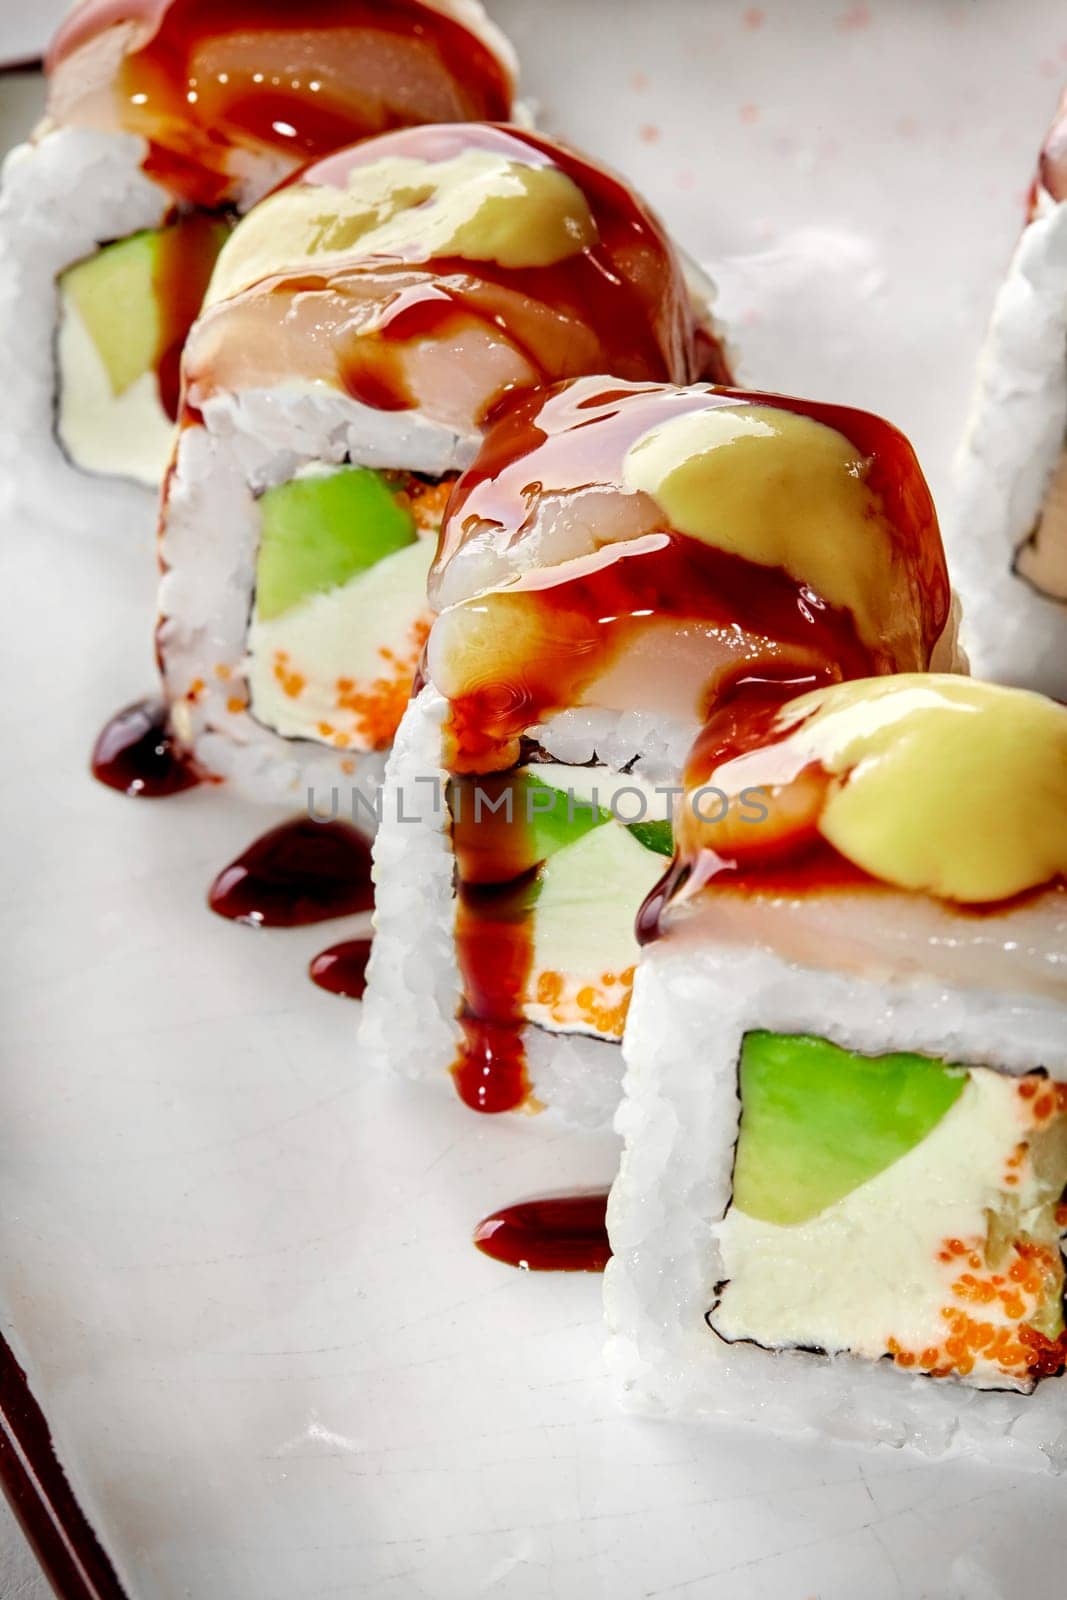 Closeup of sushi rolls with scallop, cream cheese, tobiko, avocado an sauces by nazarovsergey